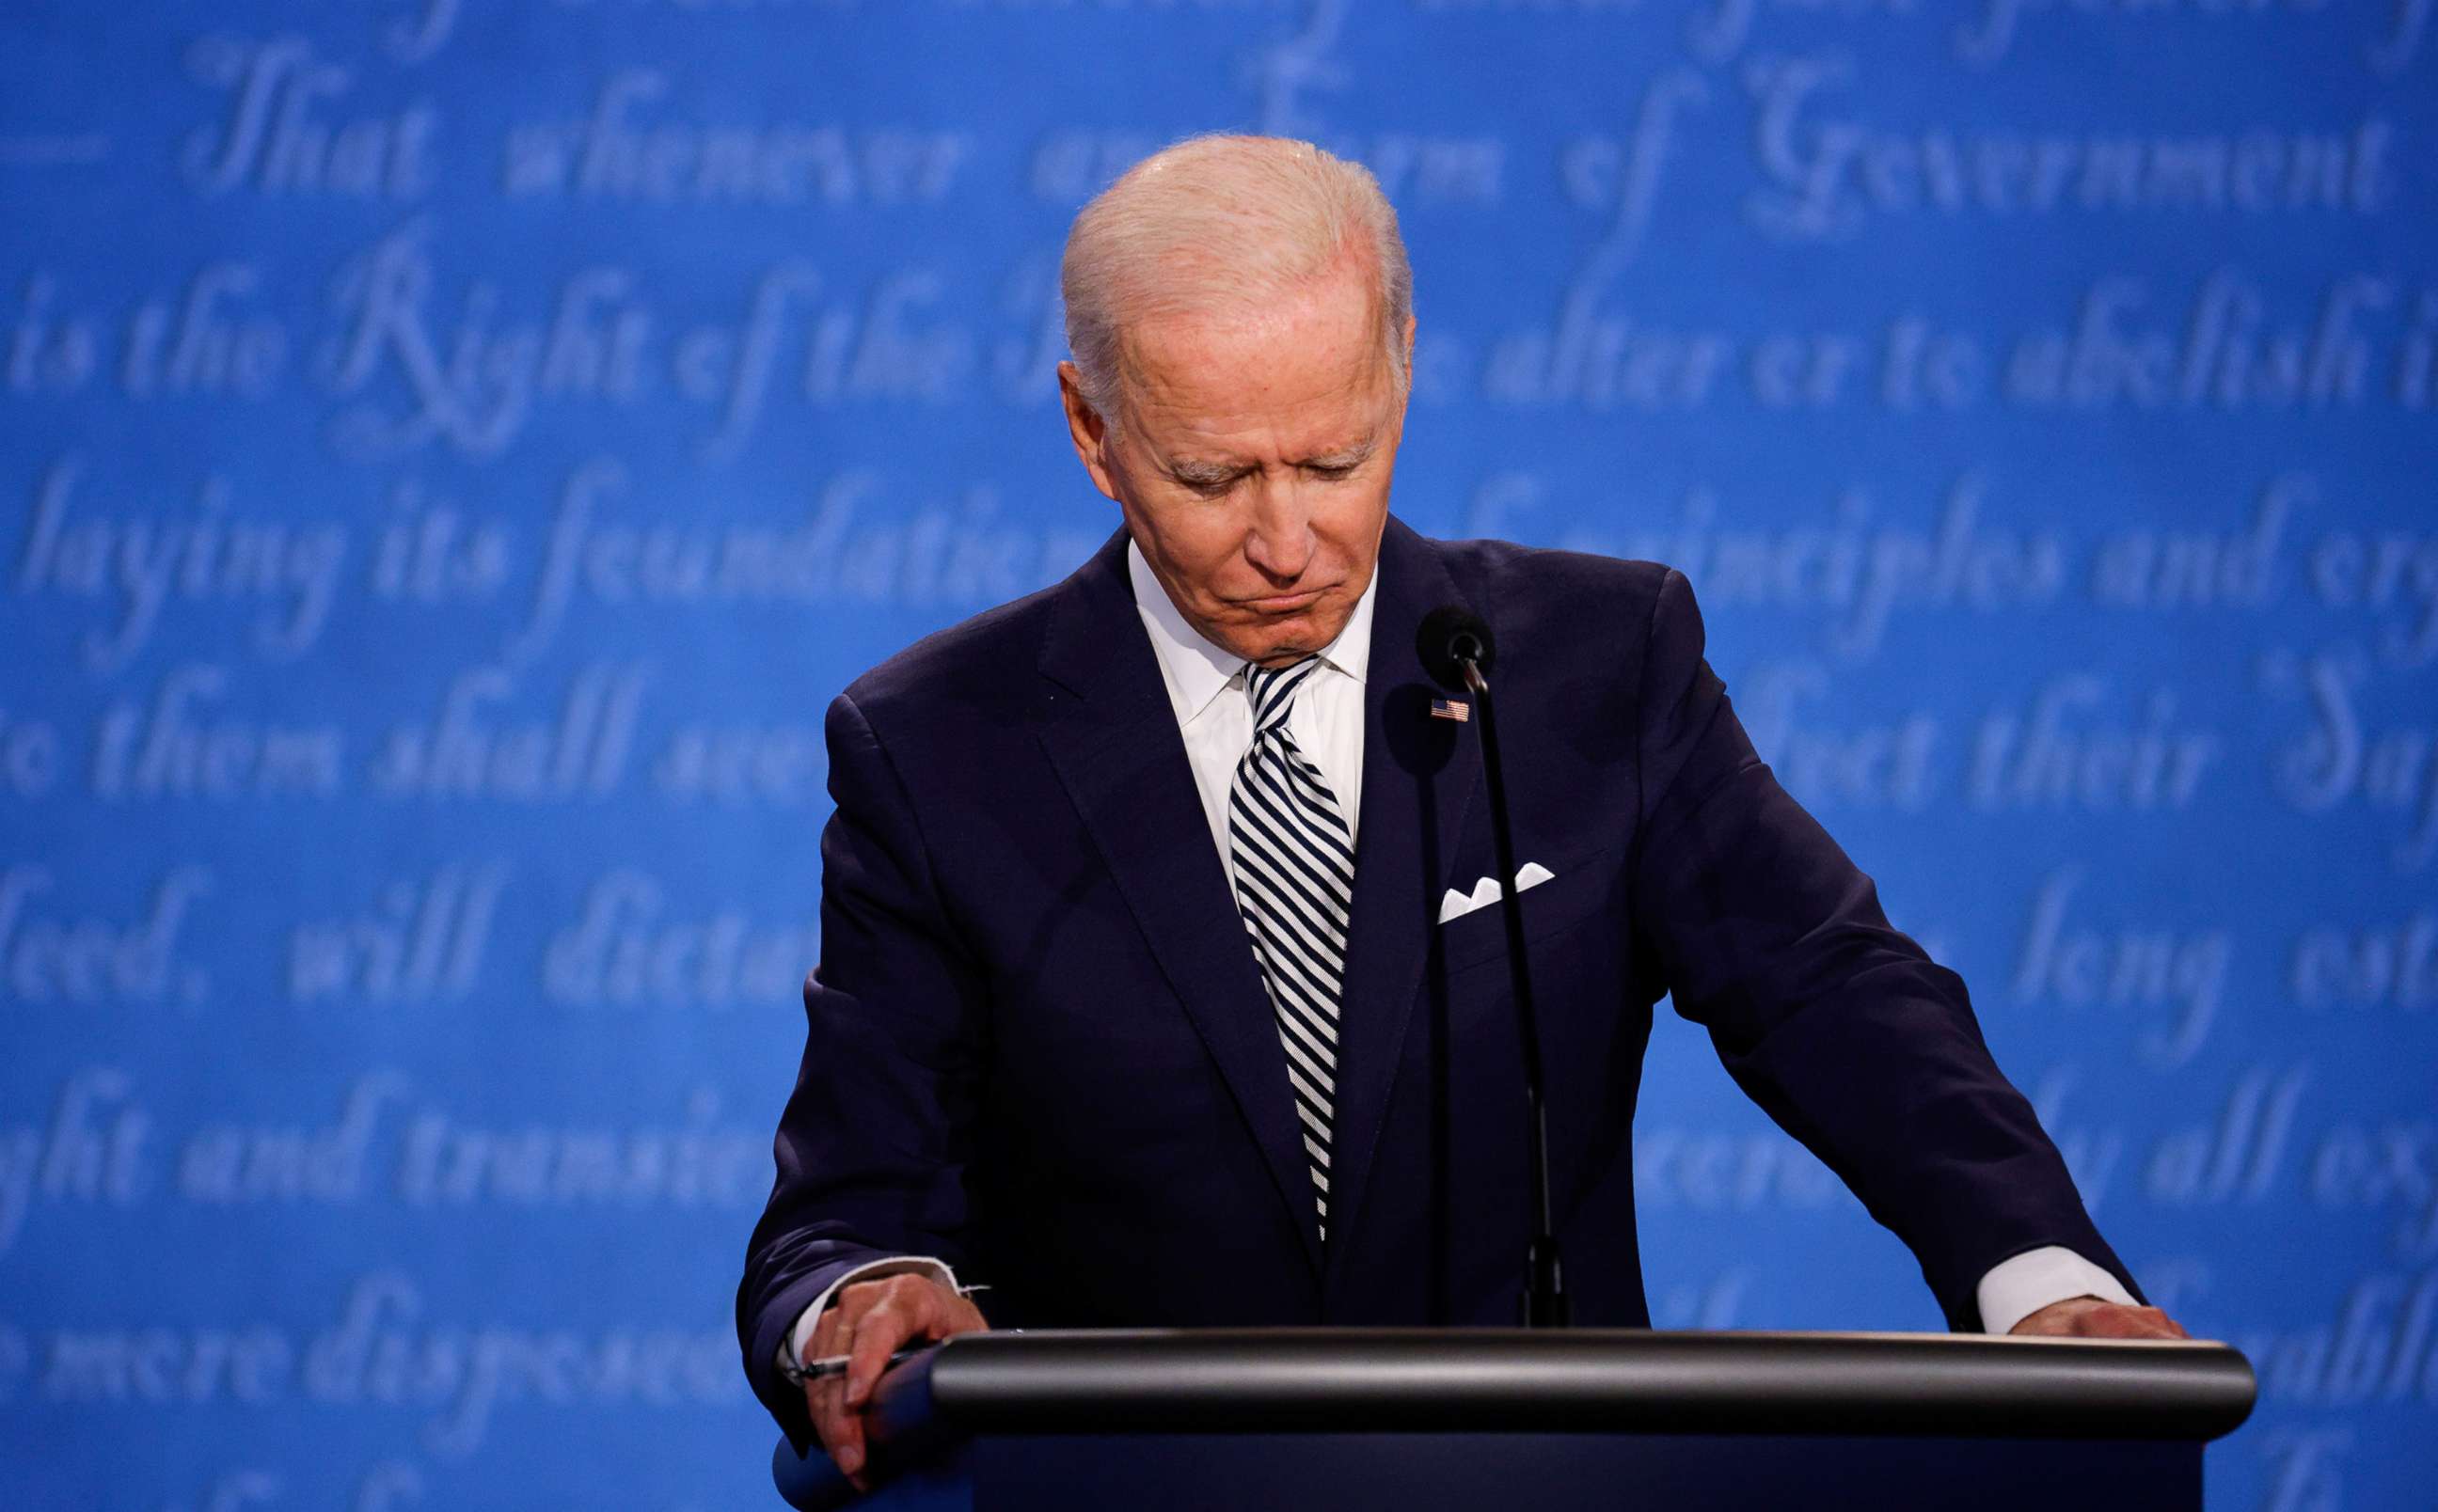 PHOTO: Democratic presidential nominee Joe Biden participates in the first presidential debate with President Donald Trump, Sept. 29, 2020, in Cleveland.